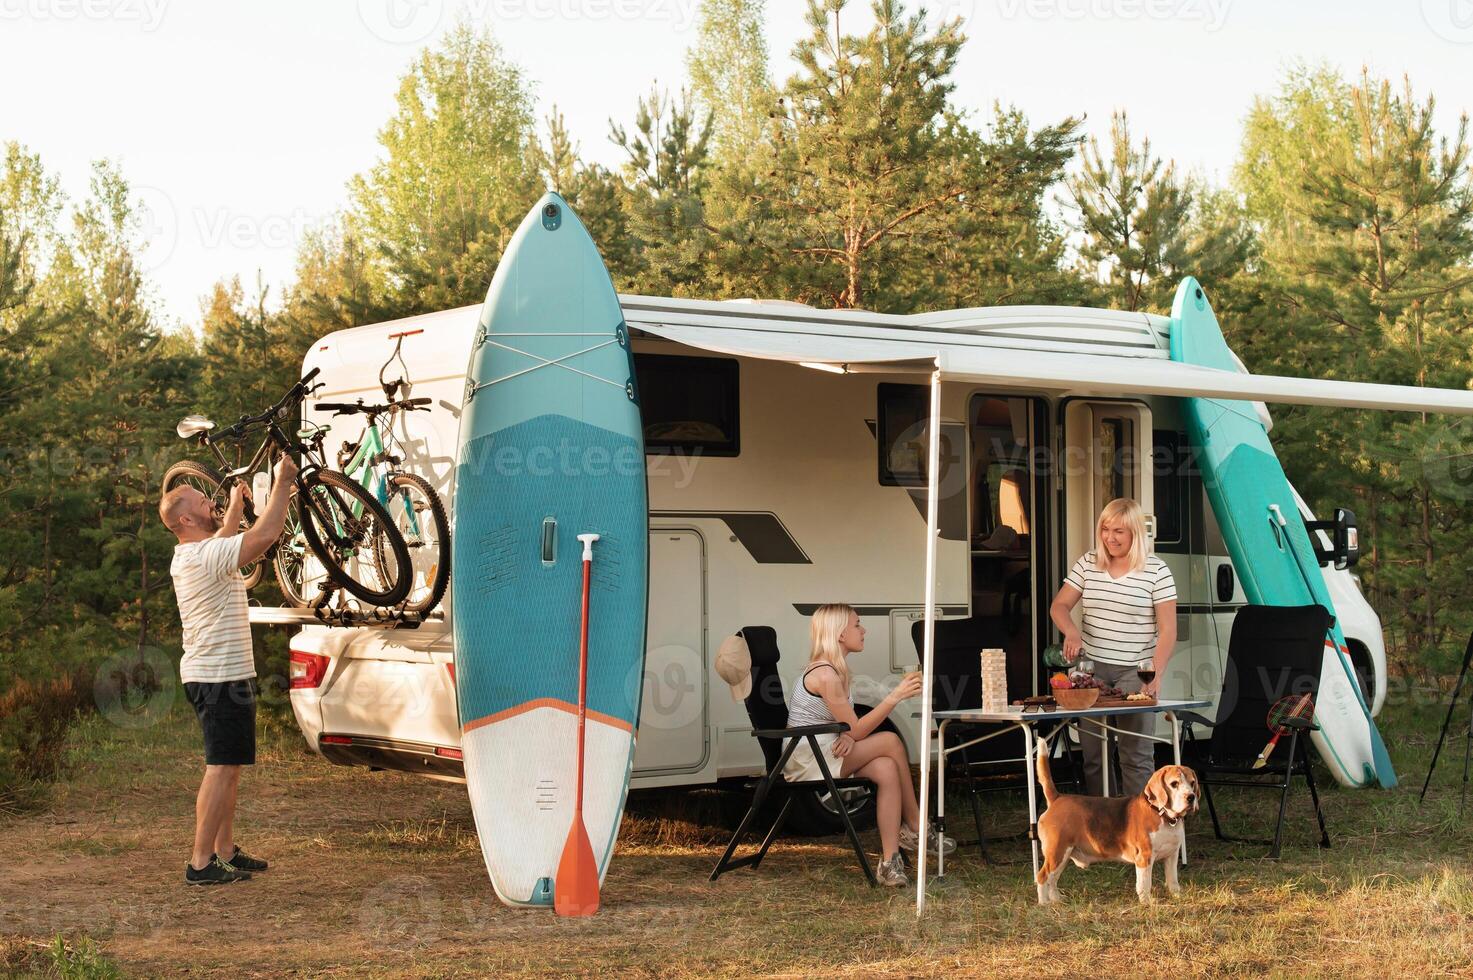 A happy family is resting nearby near their motorhome in the forest photo